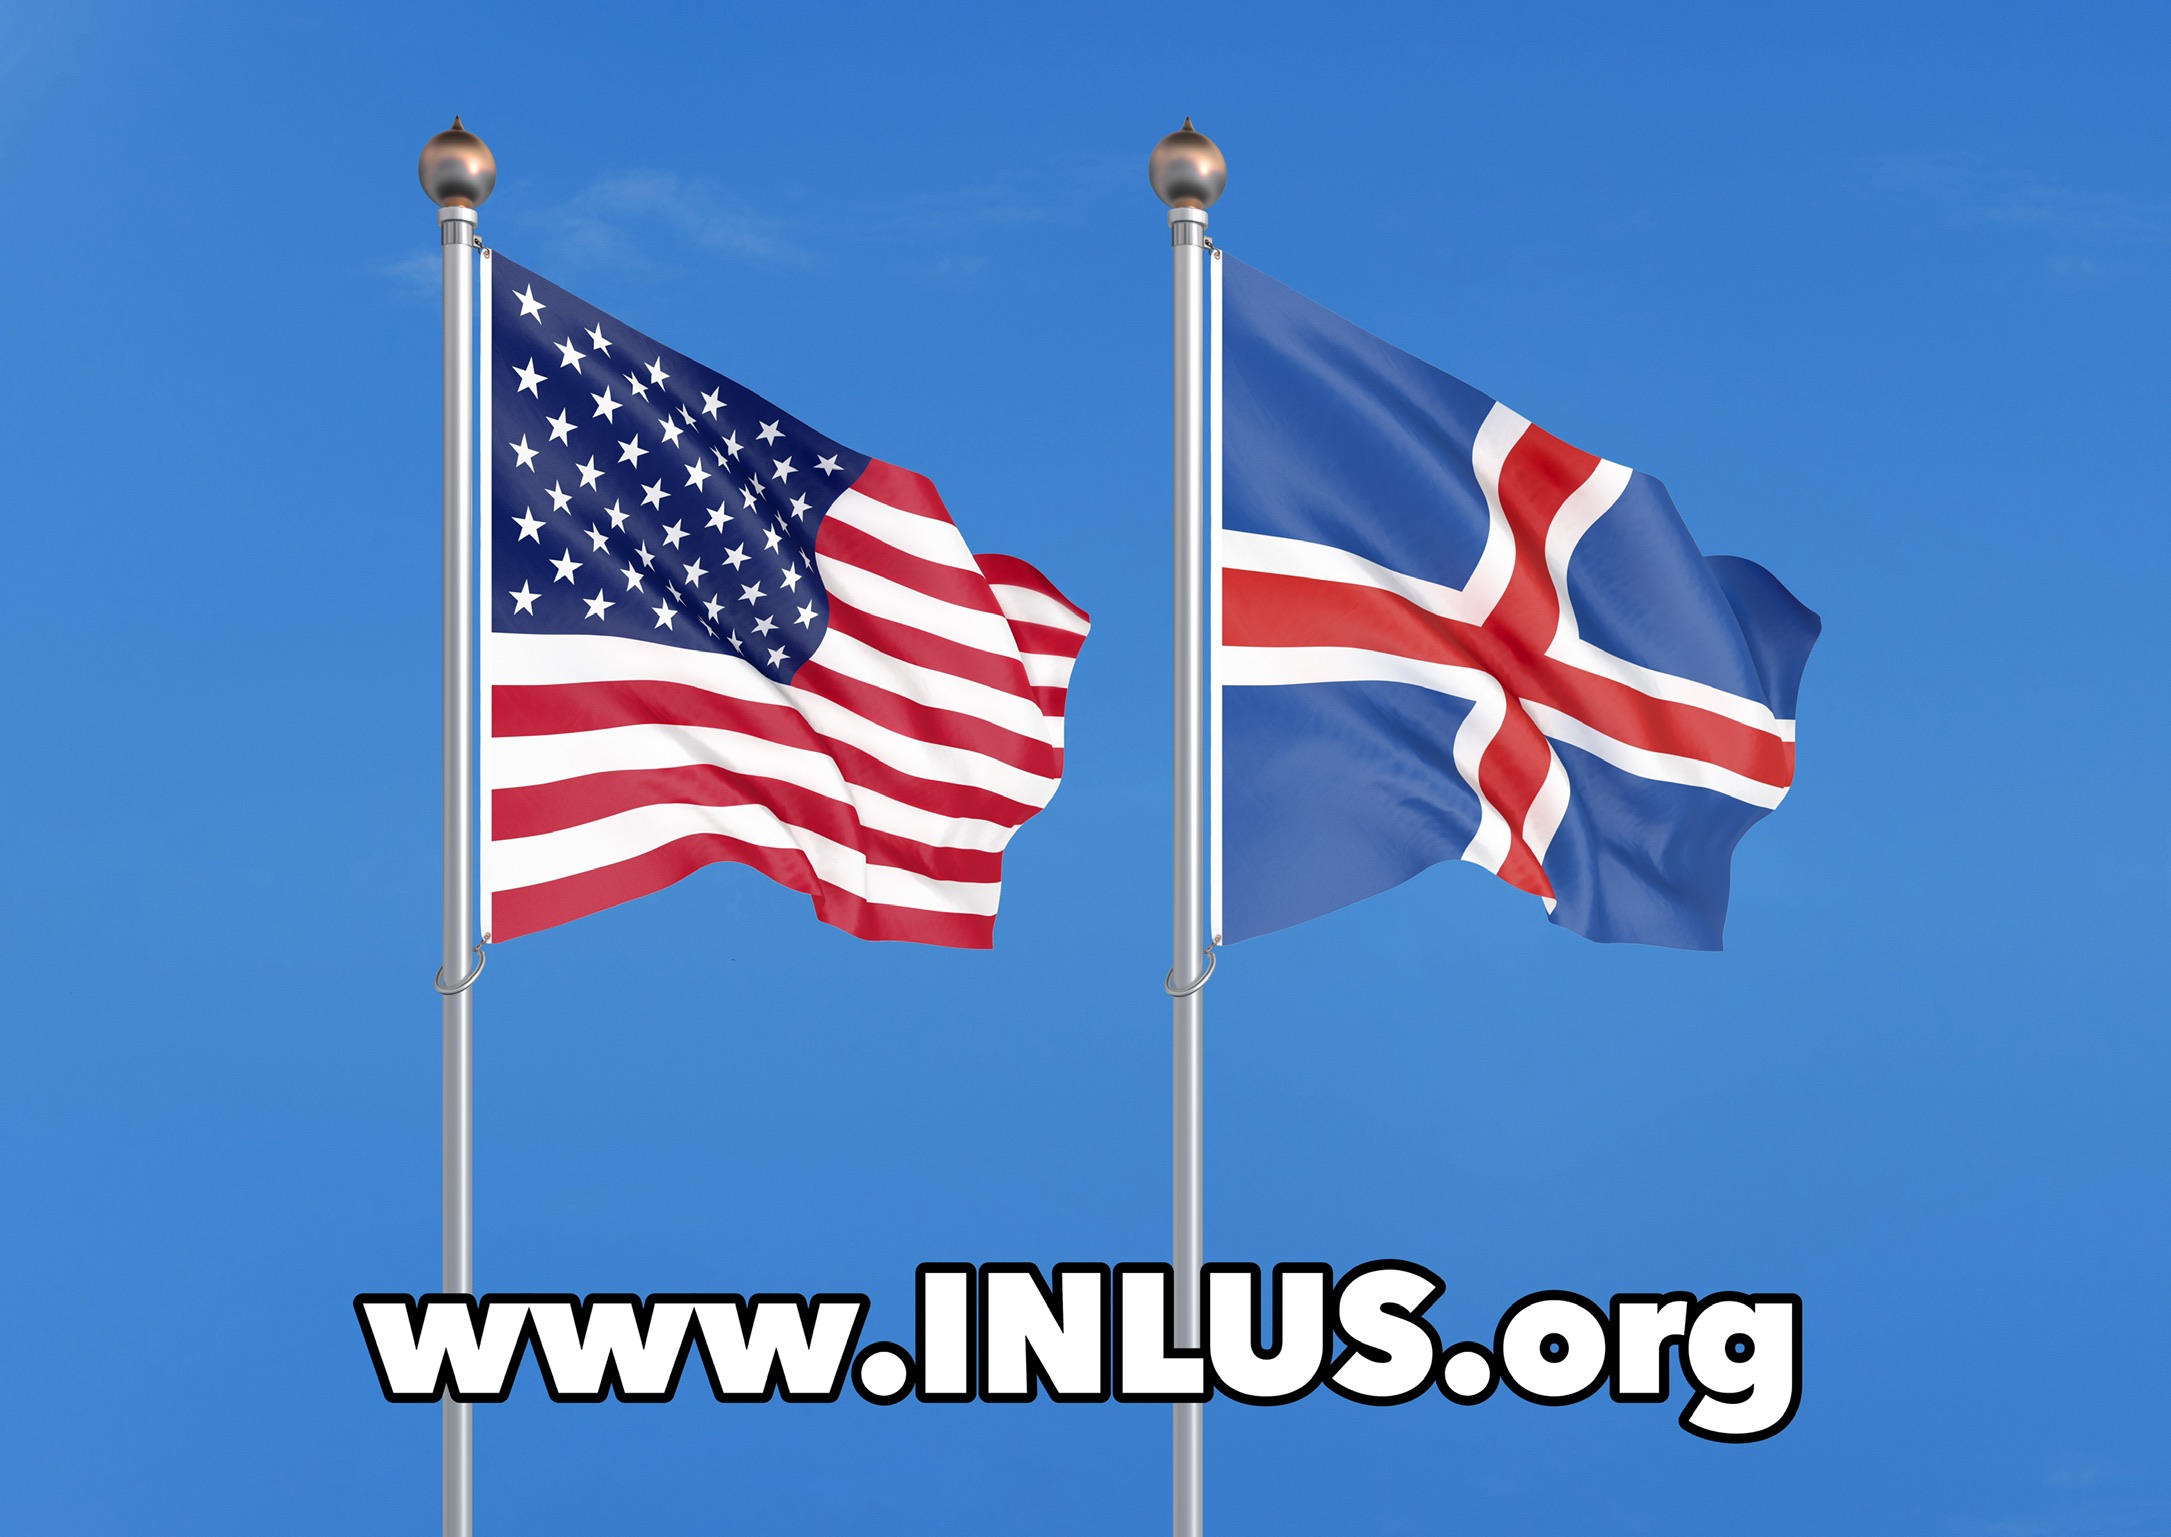 Iceland and USA flags with text (www.INLUS.org)